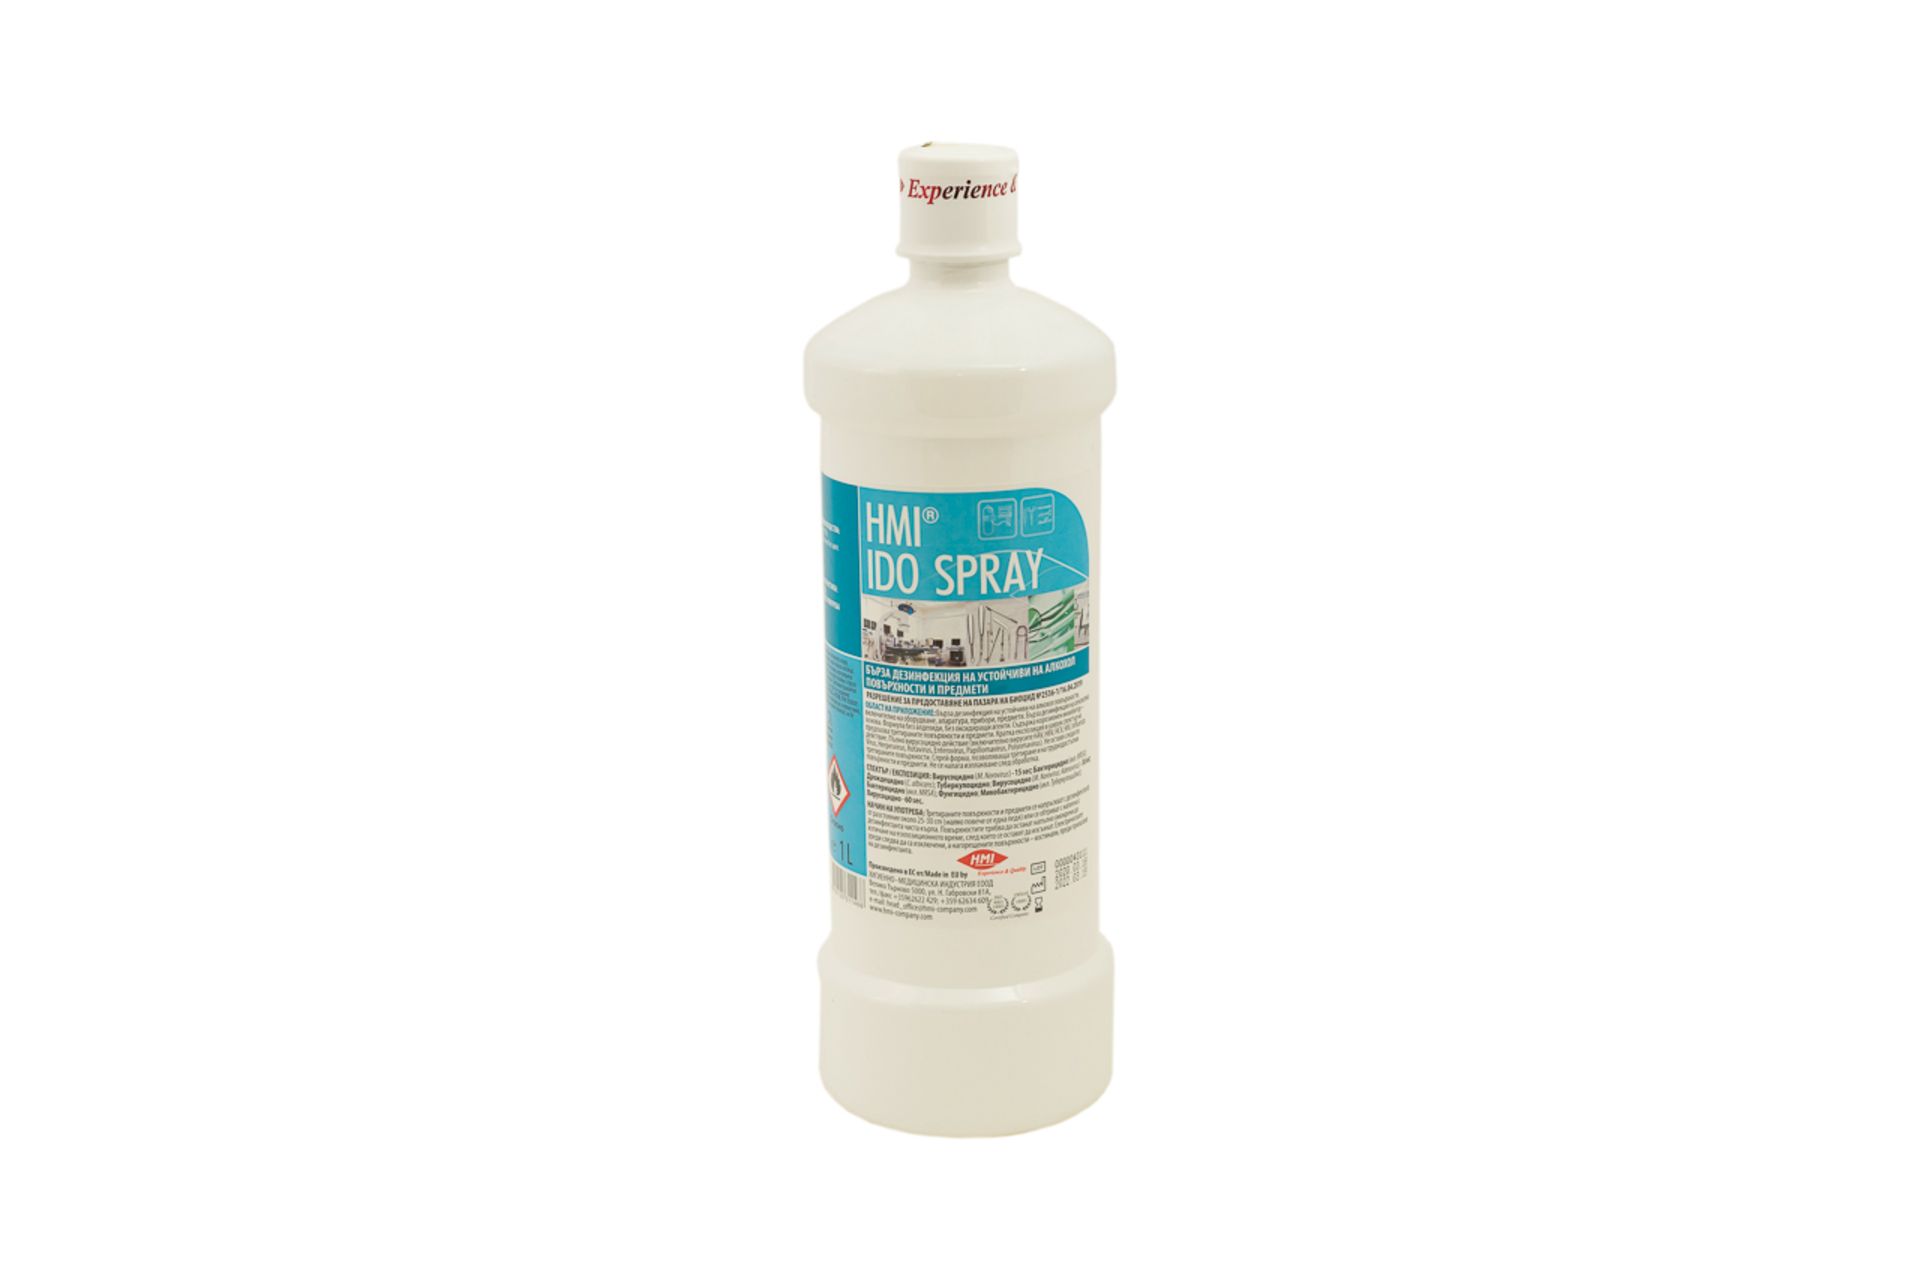 50 x IDO Spray Disinfectant For Surfaces and Items - 1L - Image 2 of 3